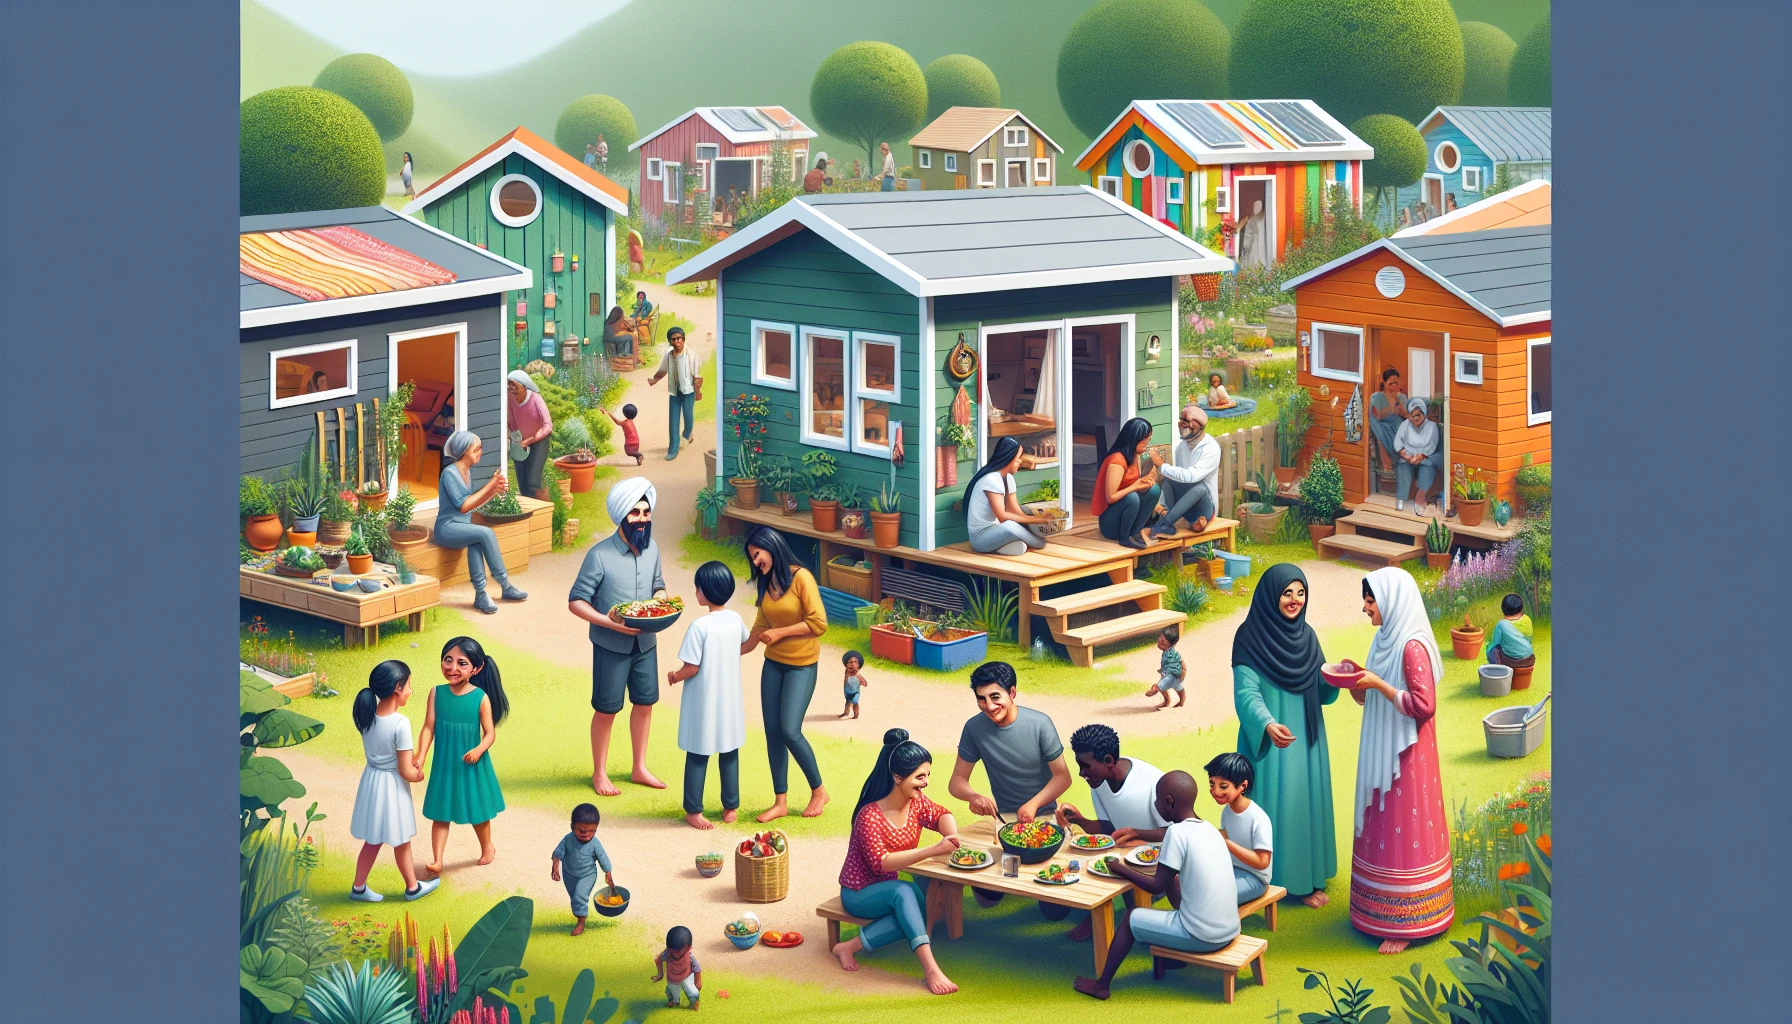 Illustration of communal spaces with diverse individuals enjoying shared amenities in a tiny house community